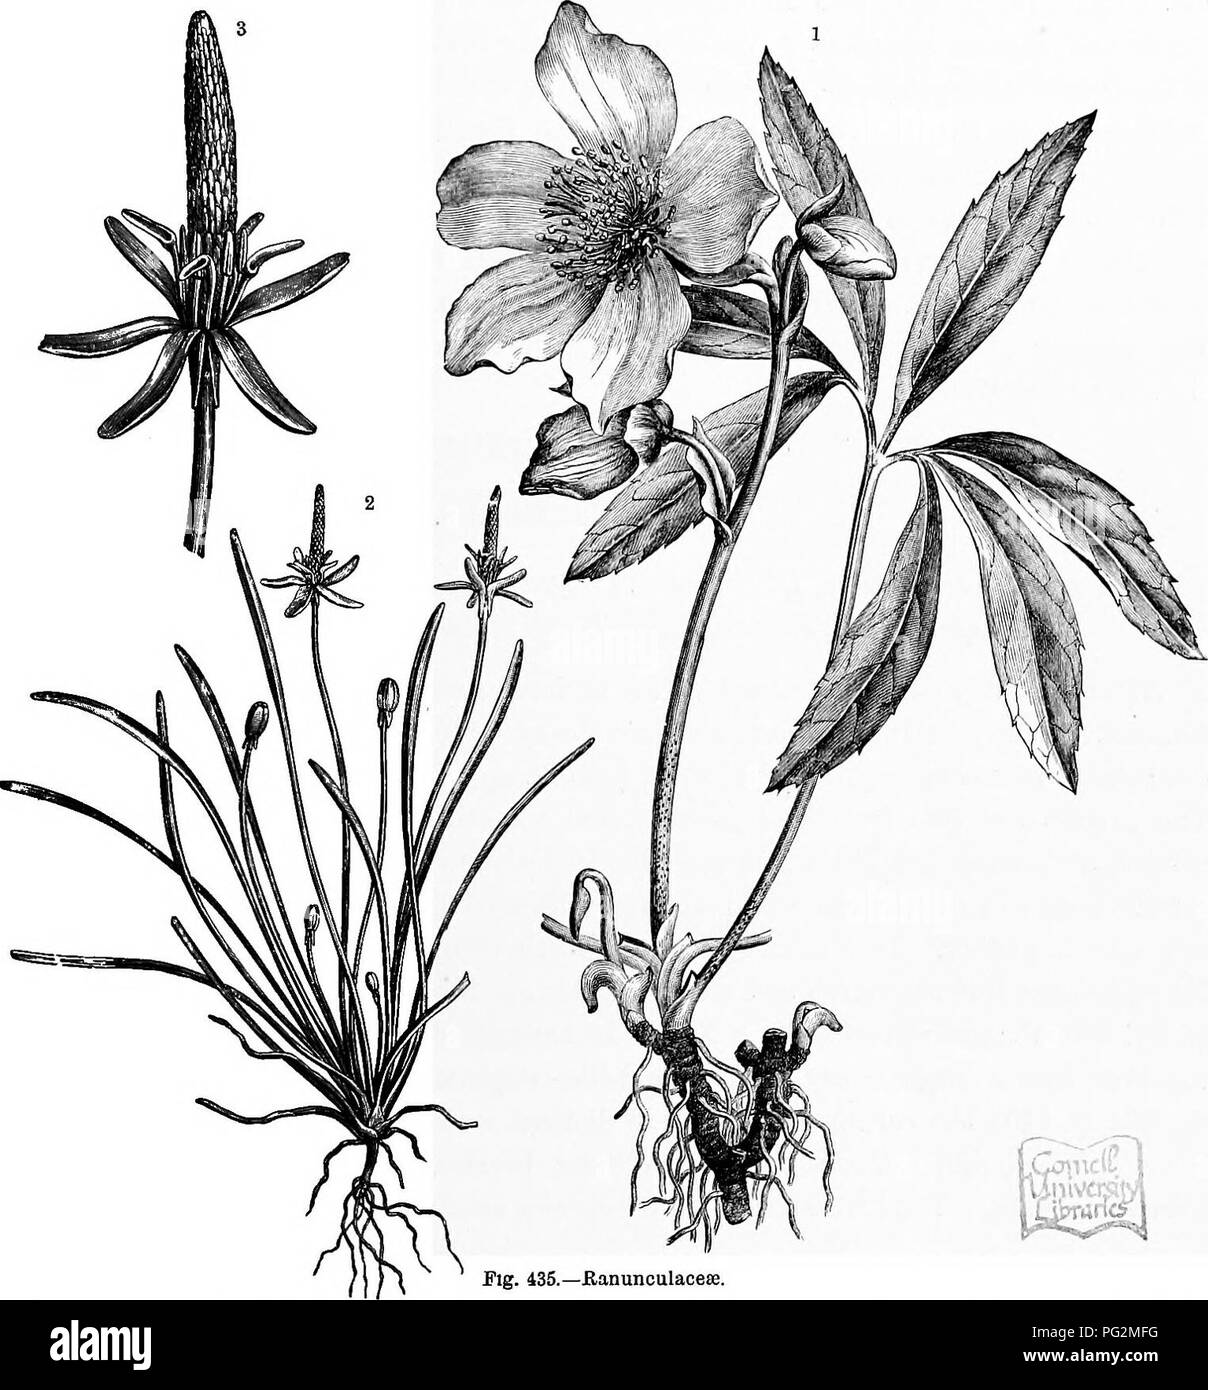 . The natural history of plants, their forms, growth, reproduction, and distribution;. Botany. ANGIOSPERMiE, DICOTYLEDONES. 773 didynamous stamens, but some of them, e.g. those of the genus Salvia (see fig. 271, p. 262), have two stamens, as have also the species of the genus Veronica (see fig. 257, p. 226) of the family Scrophulariaceae, and the majority of the Jasminaceae and Oleacese (see fig. 283 ^). Most of the Tubiflorse possess five stamens. The curious modification of the andrcecium of Asclepiadaceae has been fully described on p. 257,. Fig. 435.—JBanunculaoece, ' Helleborus niger (red Stock Photo